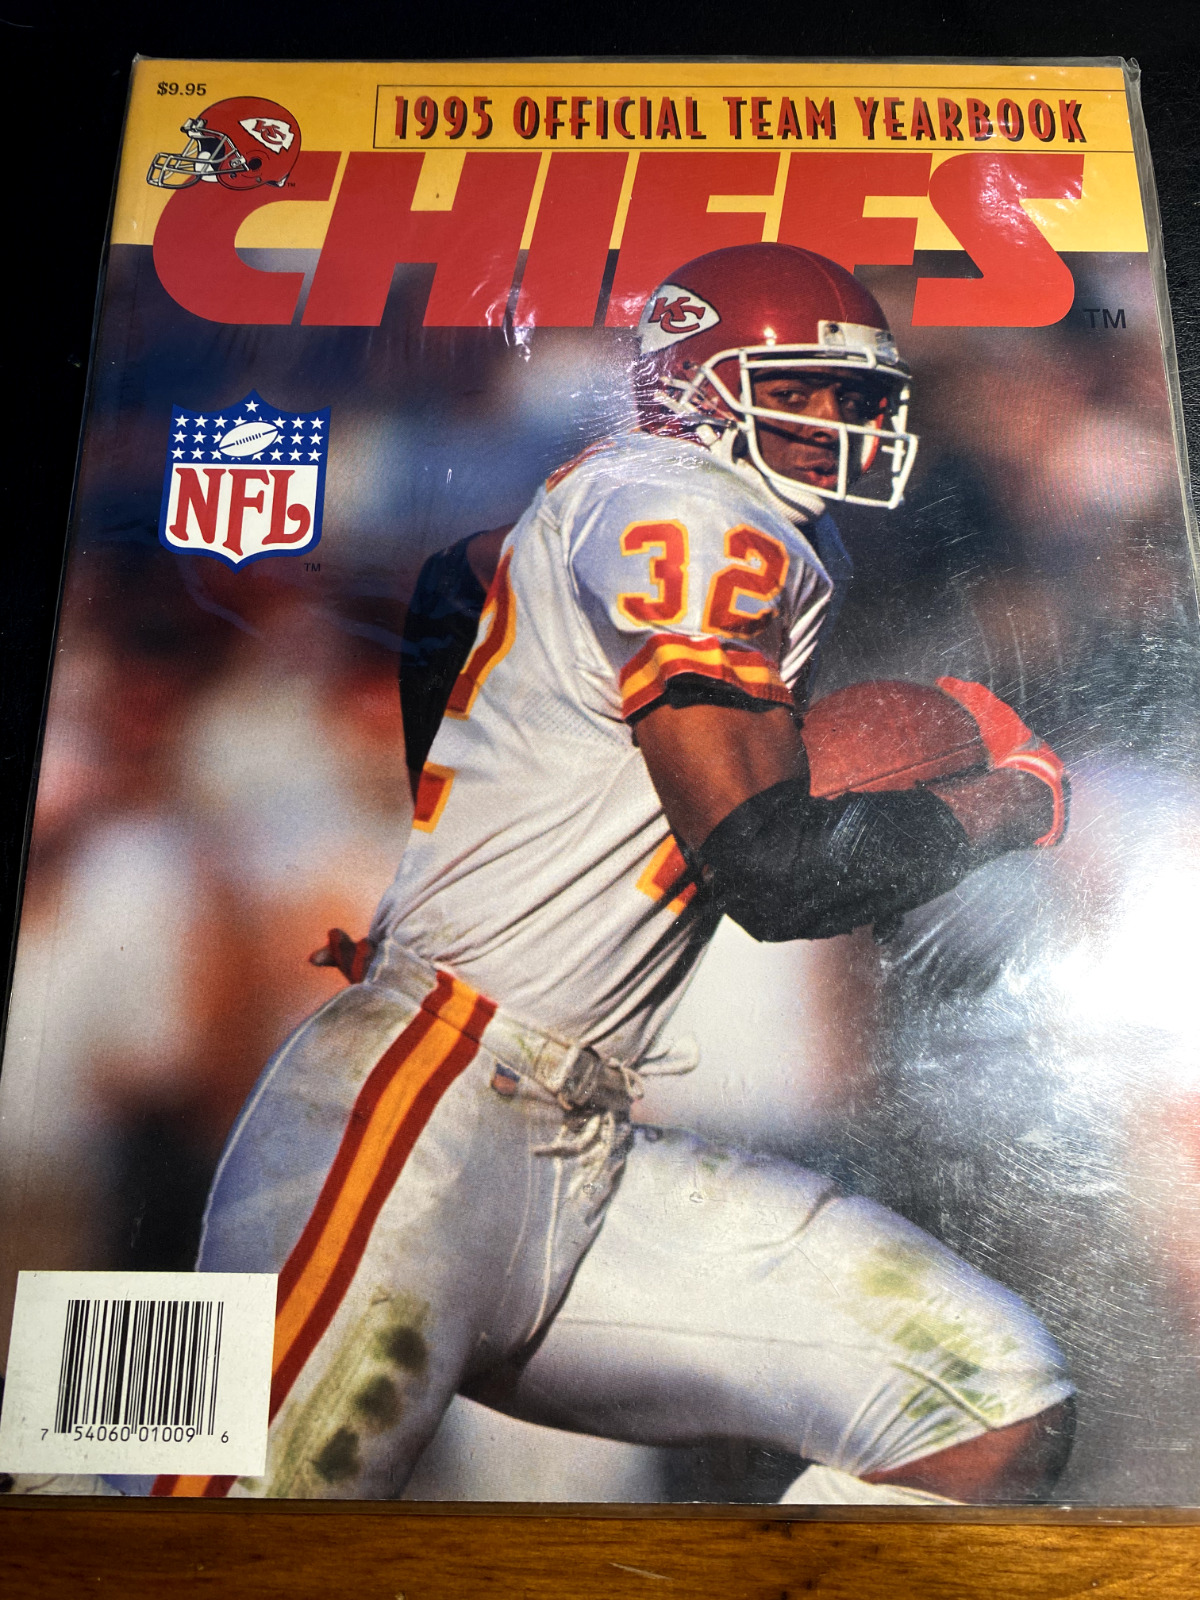 1995 Chiffs Official Team Yearbook NFL Football